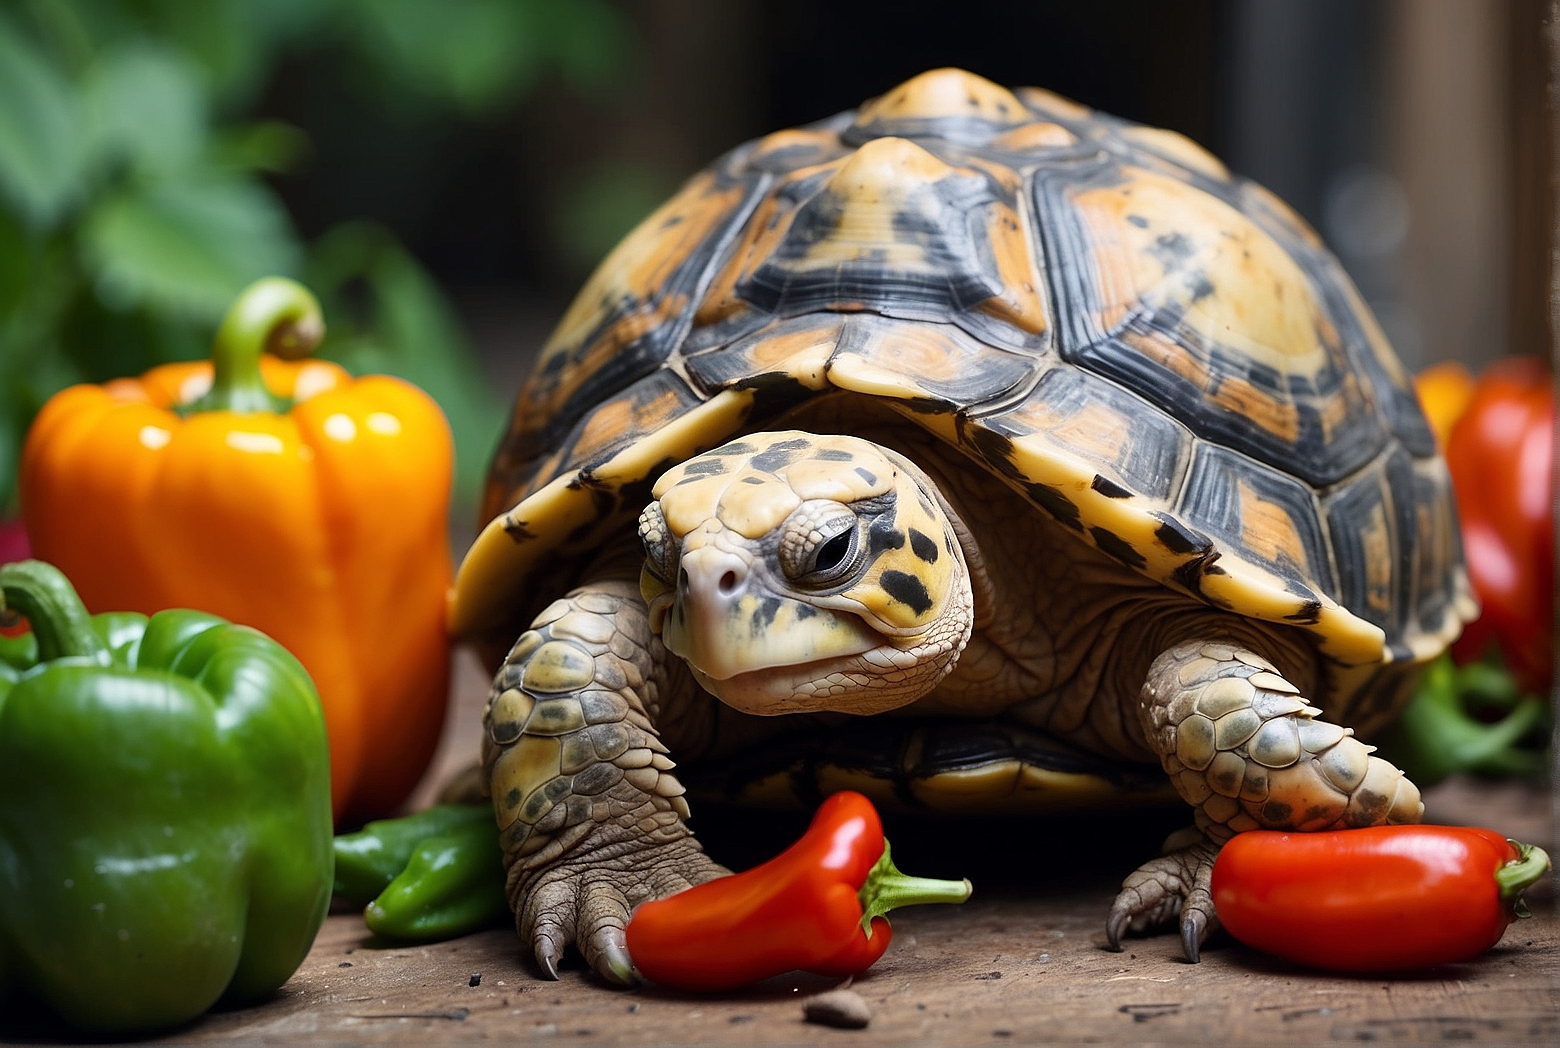 Can Russian Tortoises Eat Bell Peppers?